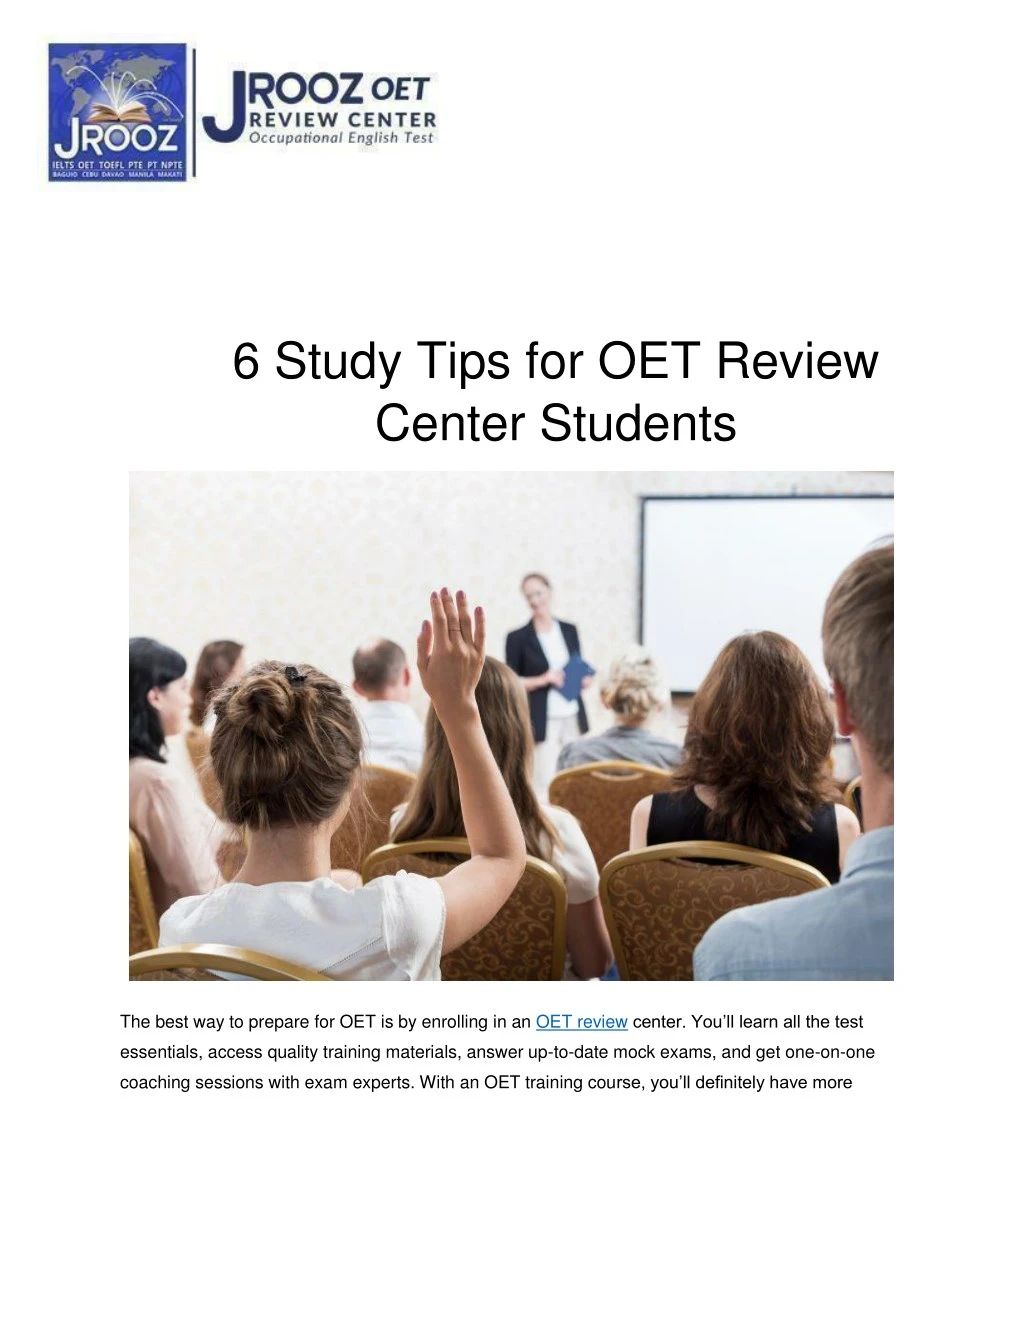 6 study tips for oet review center students